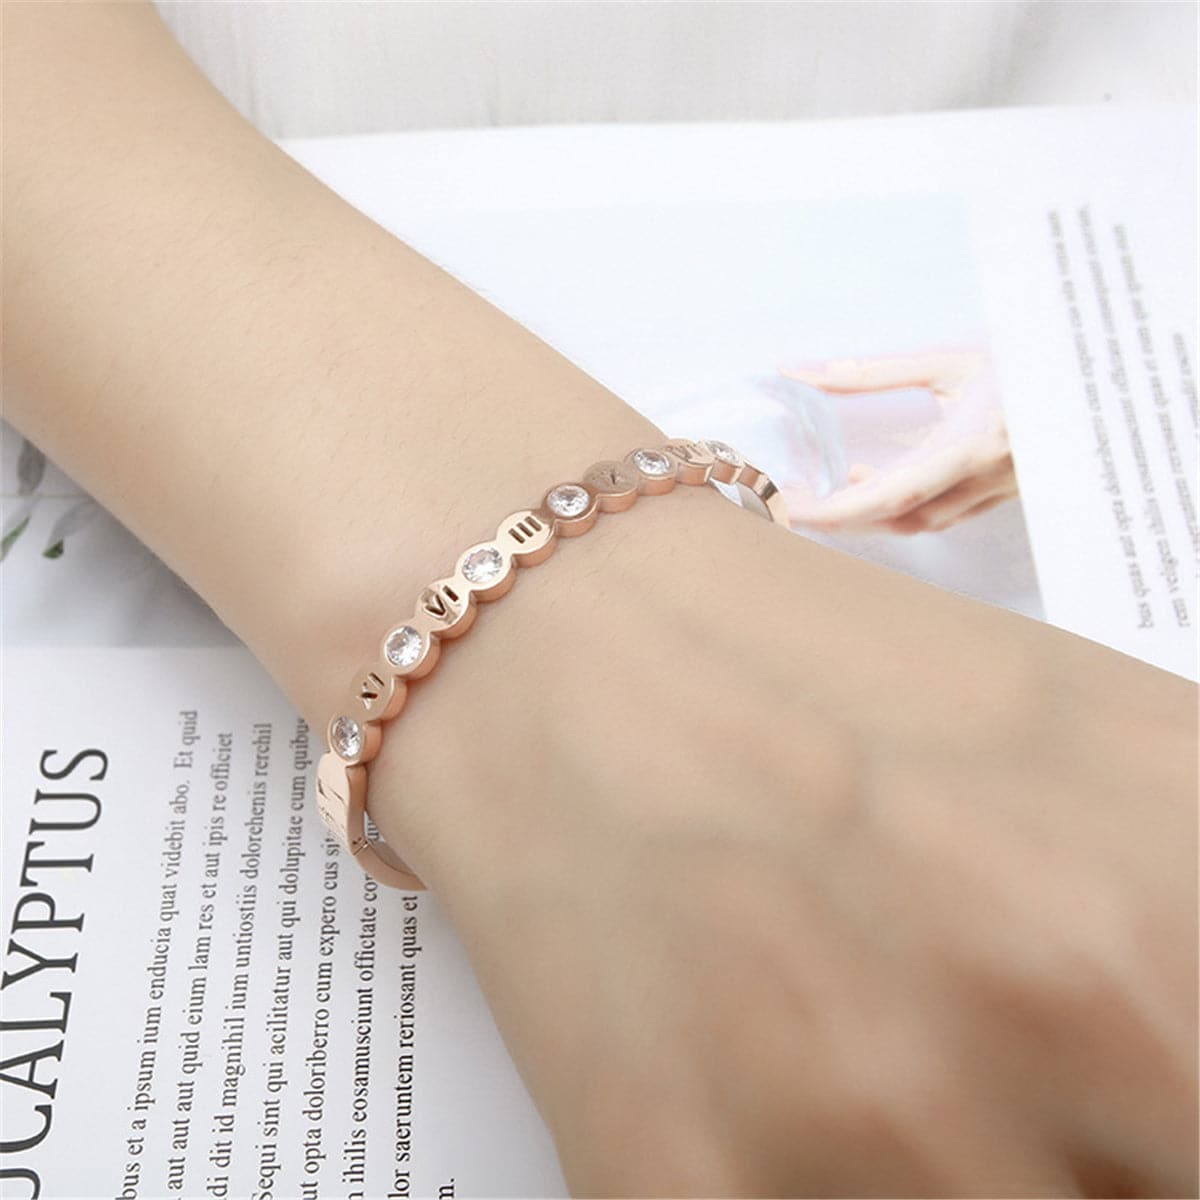 Cubic Zirconia & 18K Rose Gold-Plated Roman Numeral Bangle